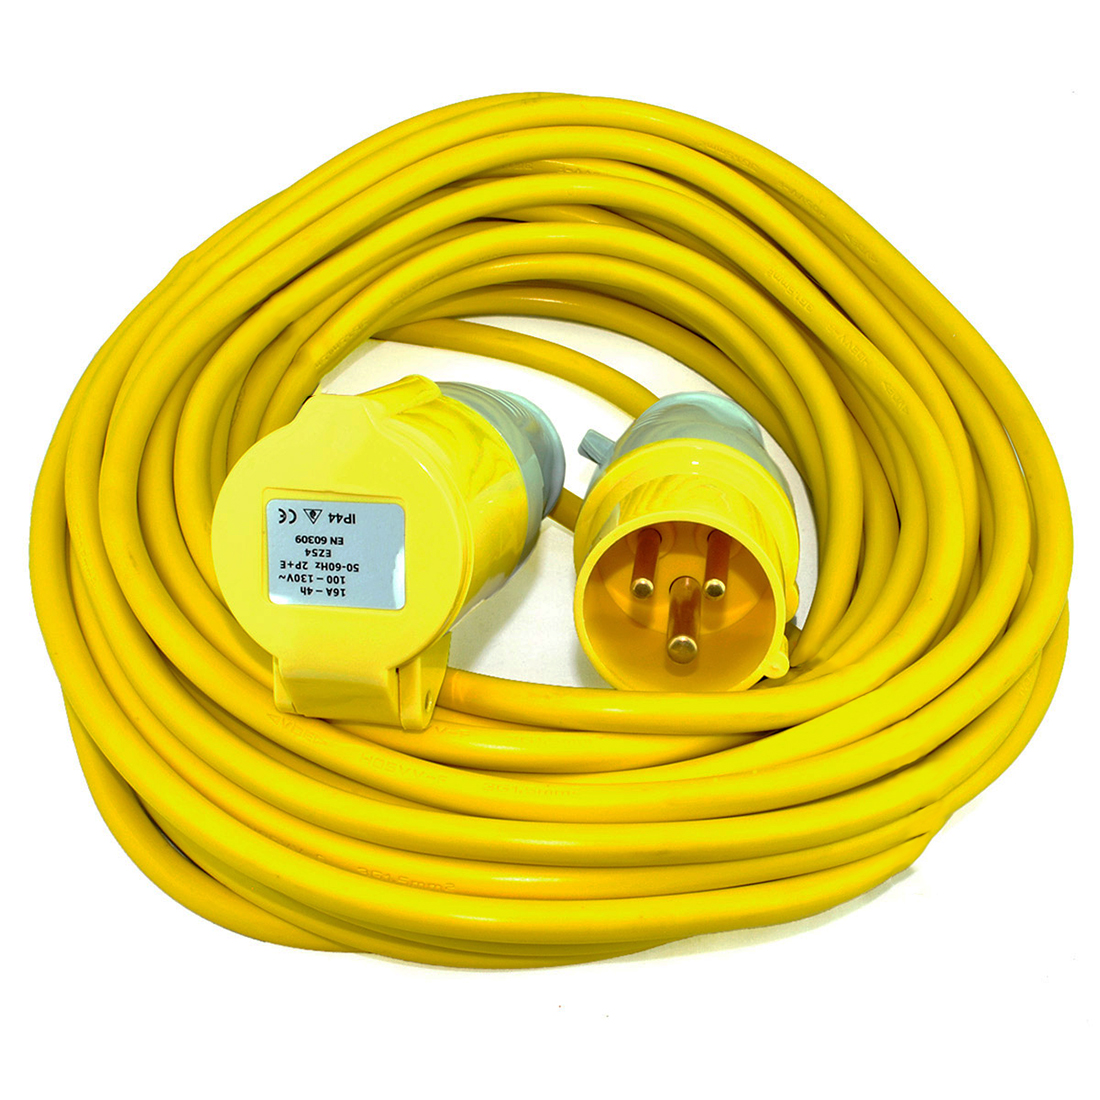 Waterproof Cable Drum - 240V 16A